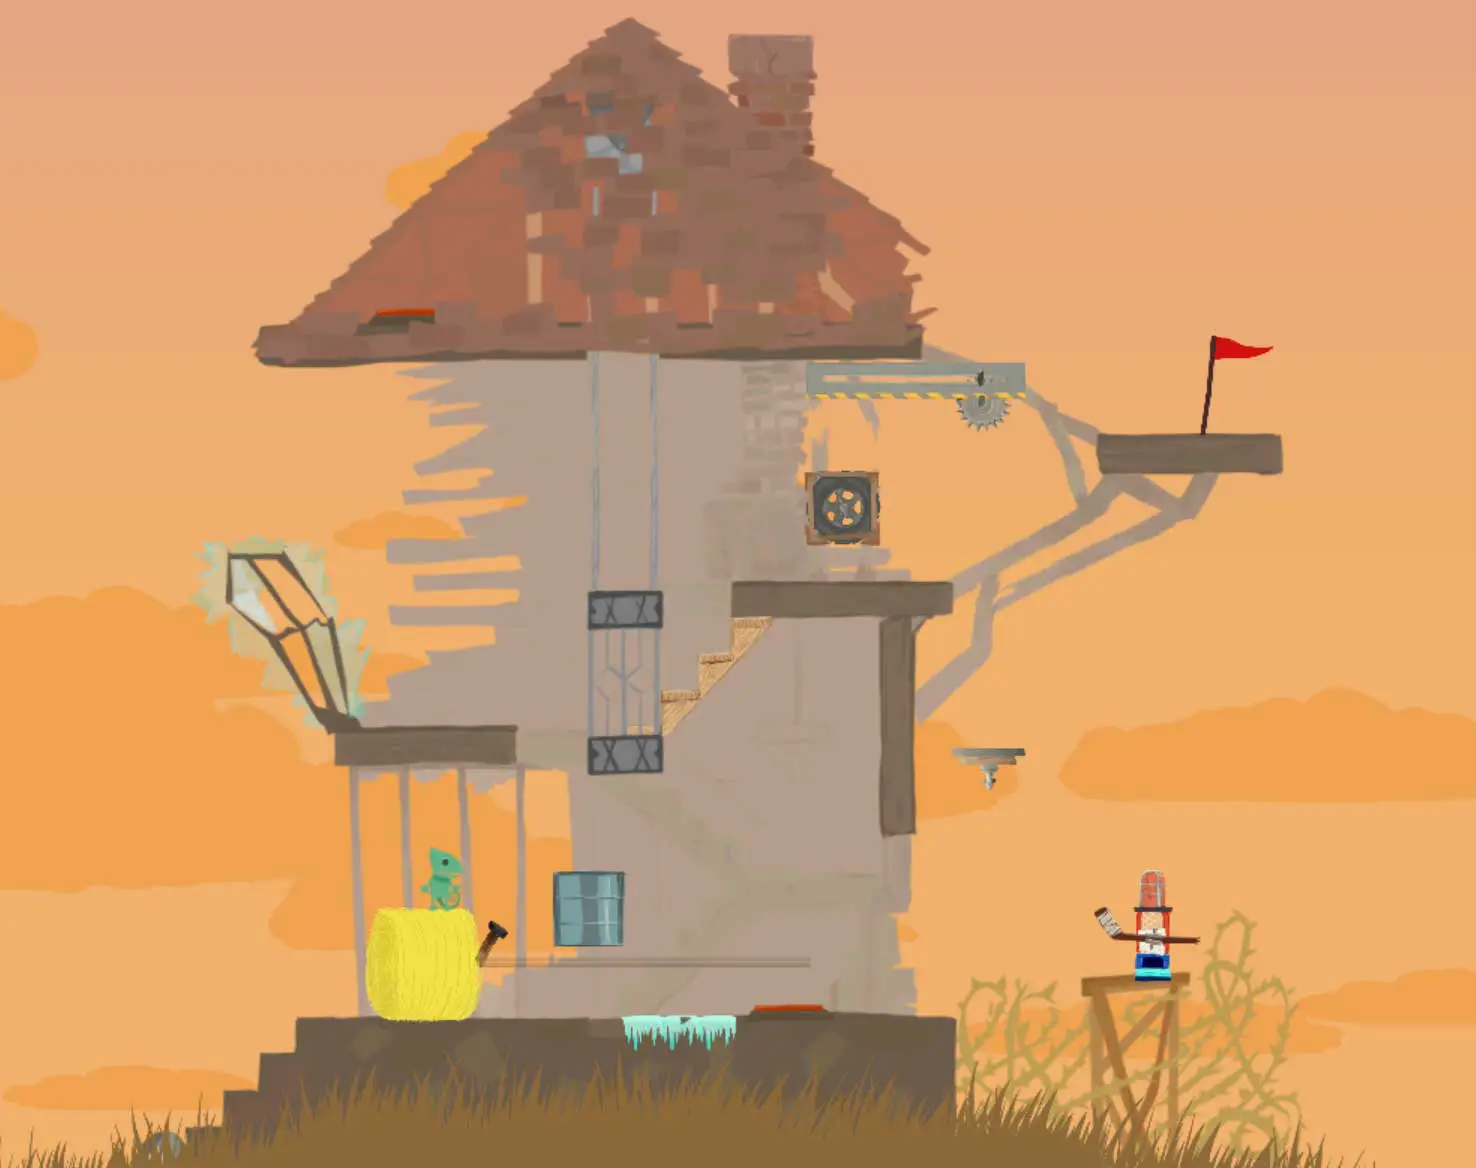 ultimate chicken horse full version download